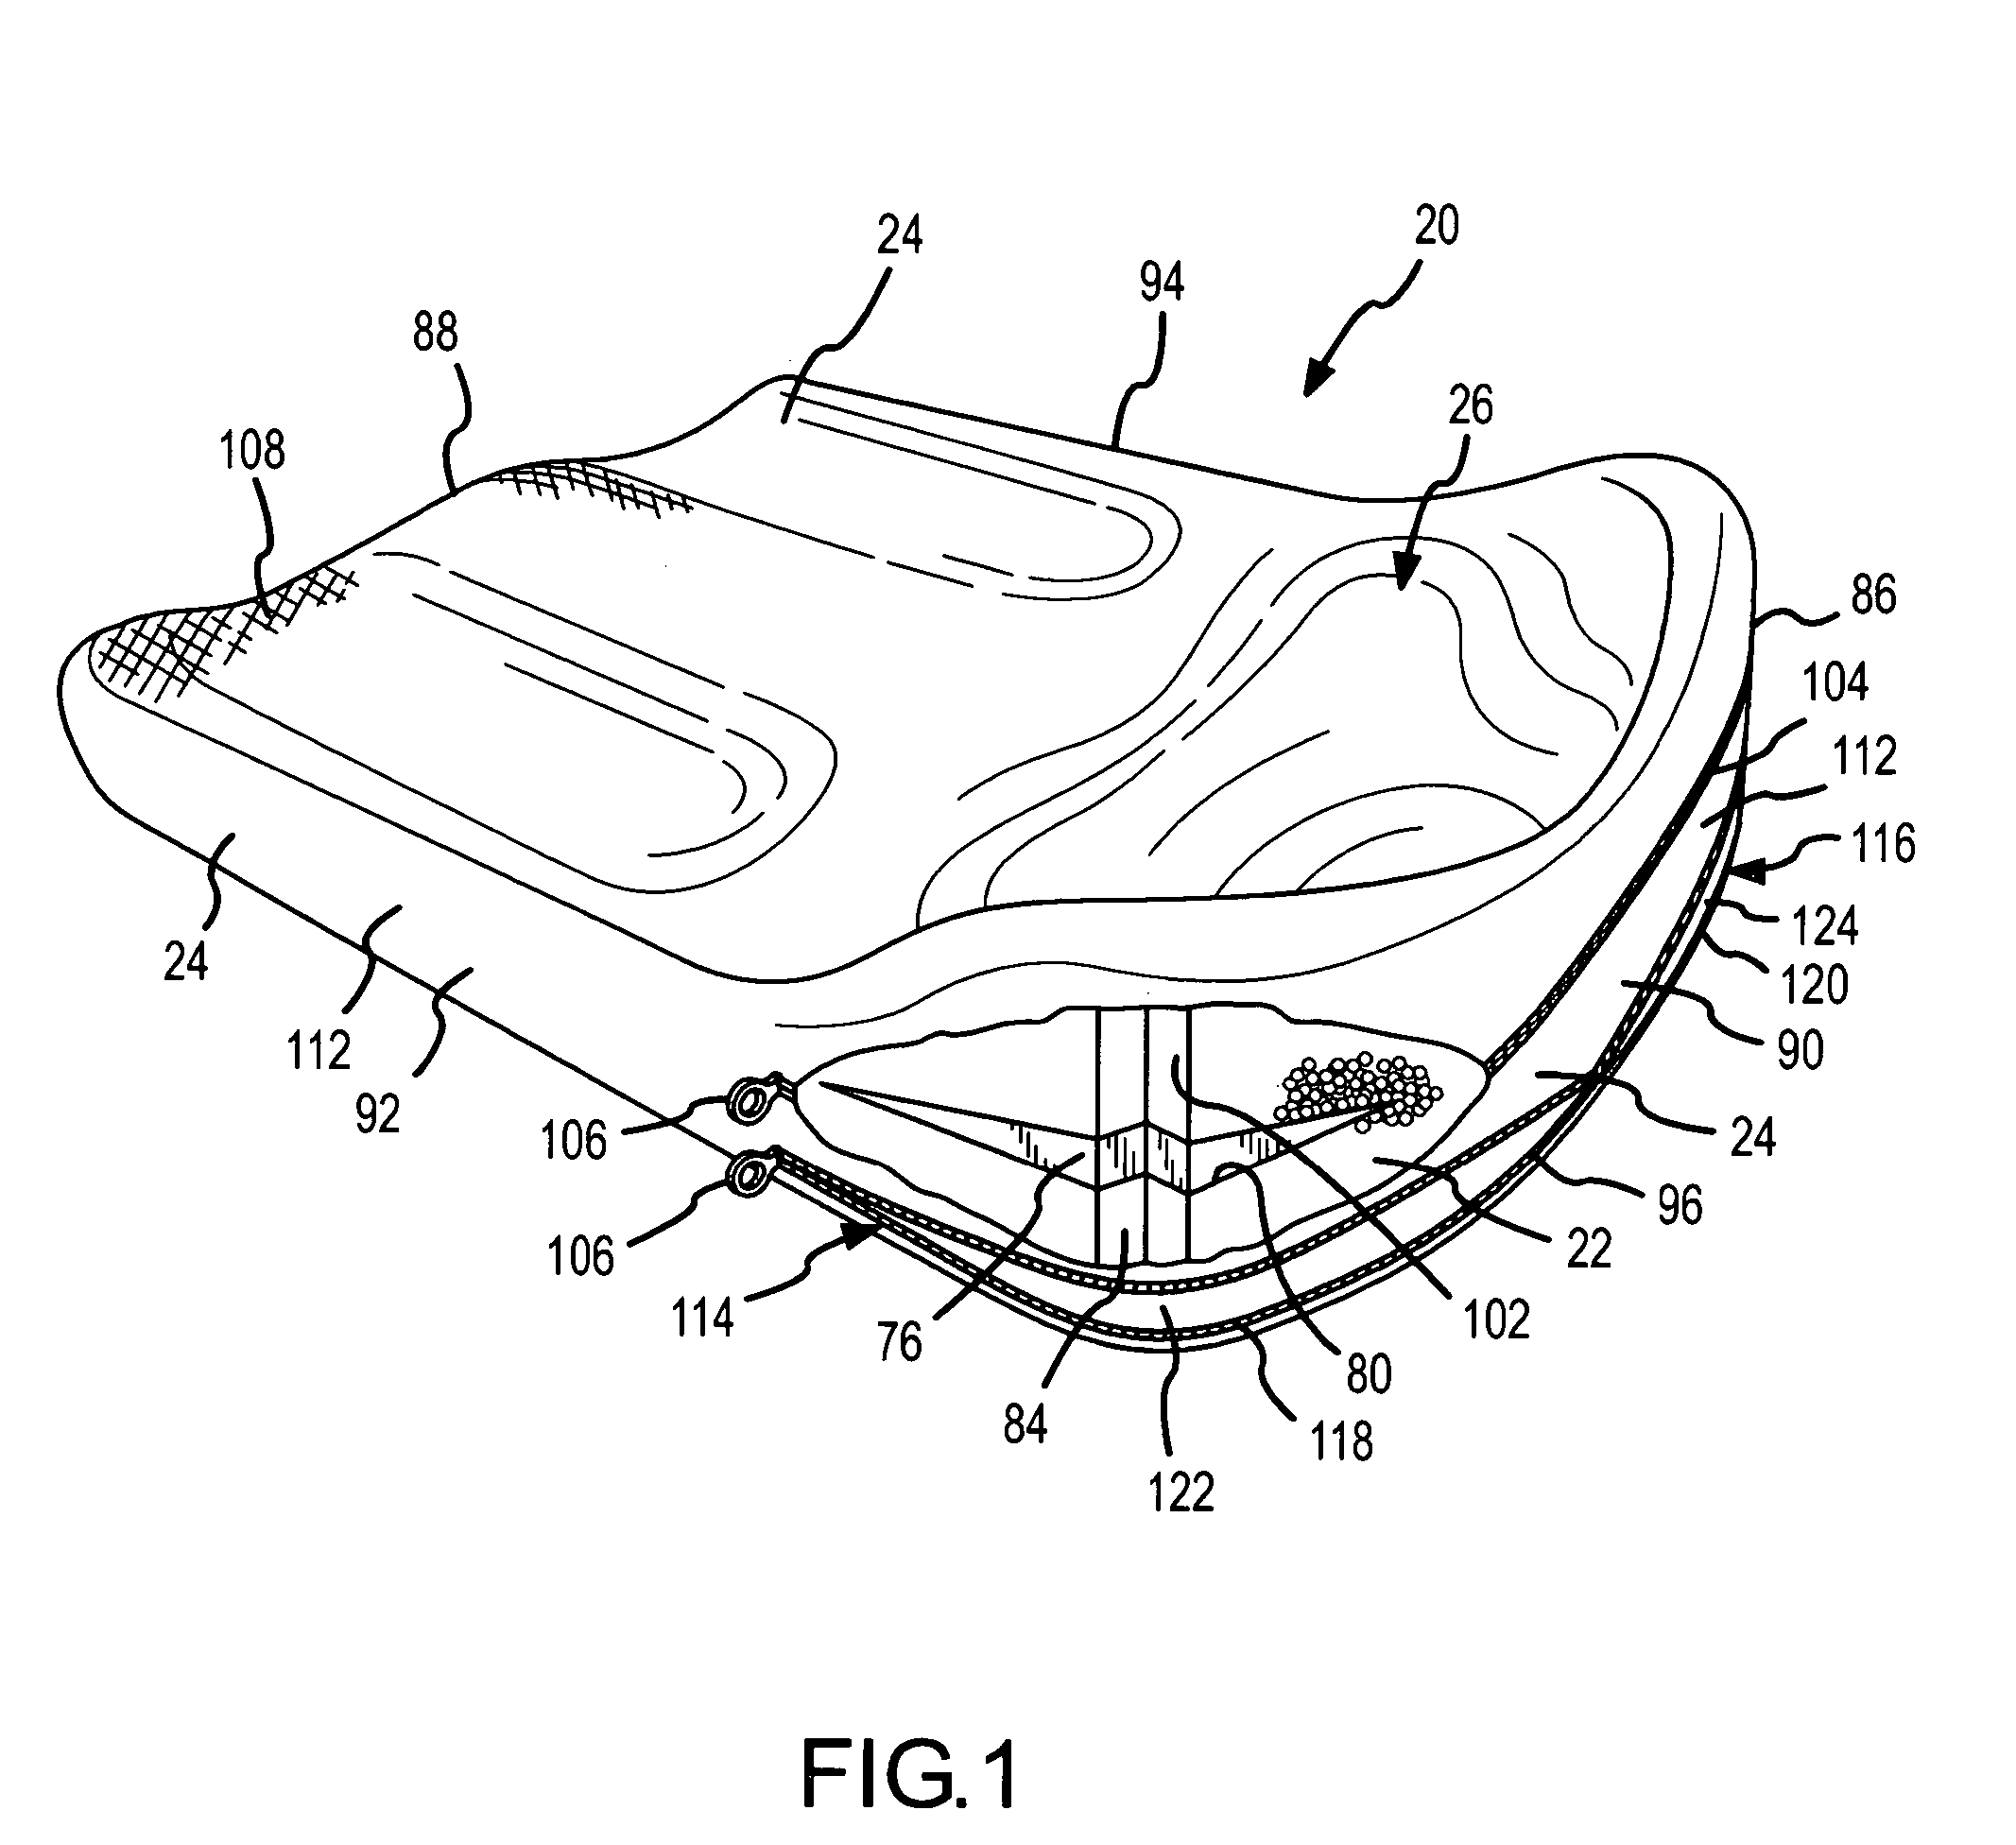 Seat cushion with adjustable contour and method of adjusting the contour of a seat cushion